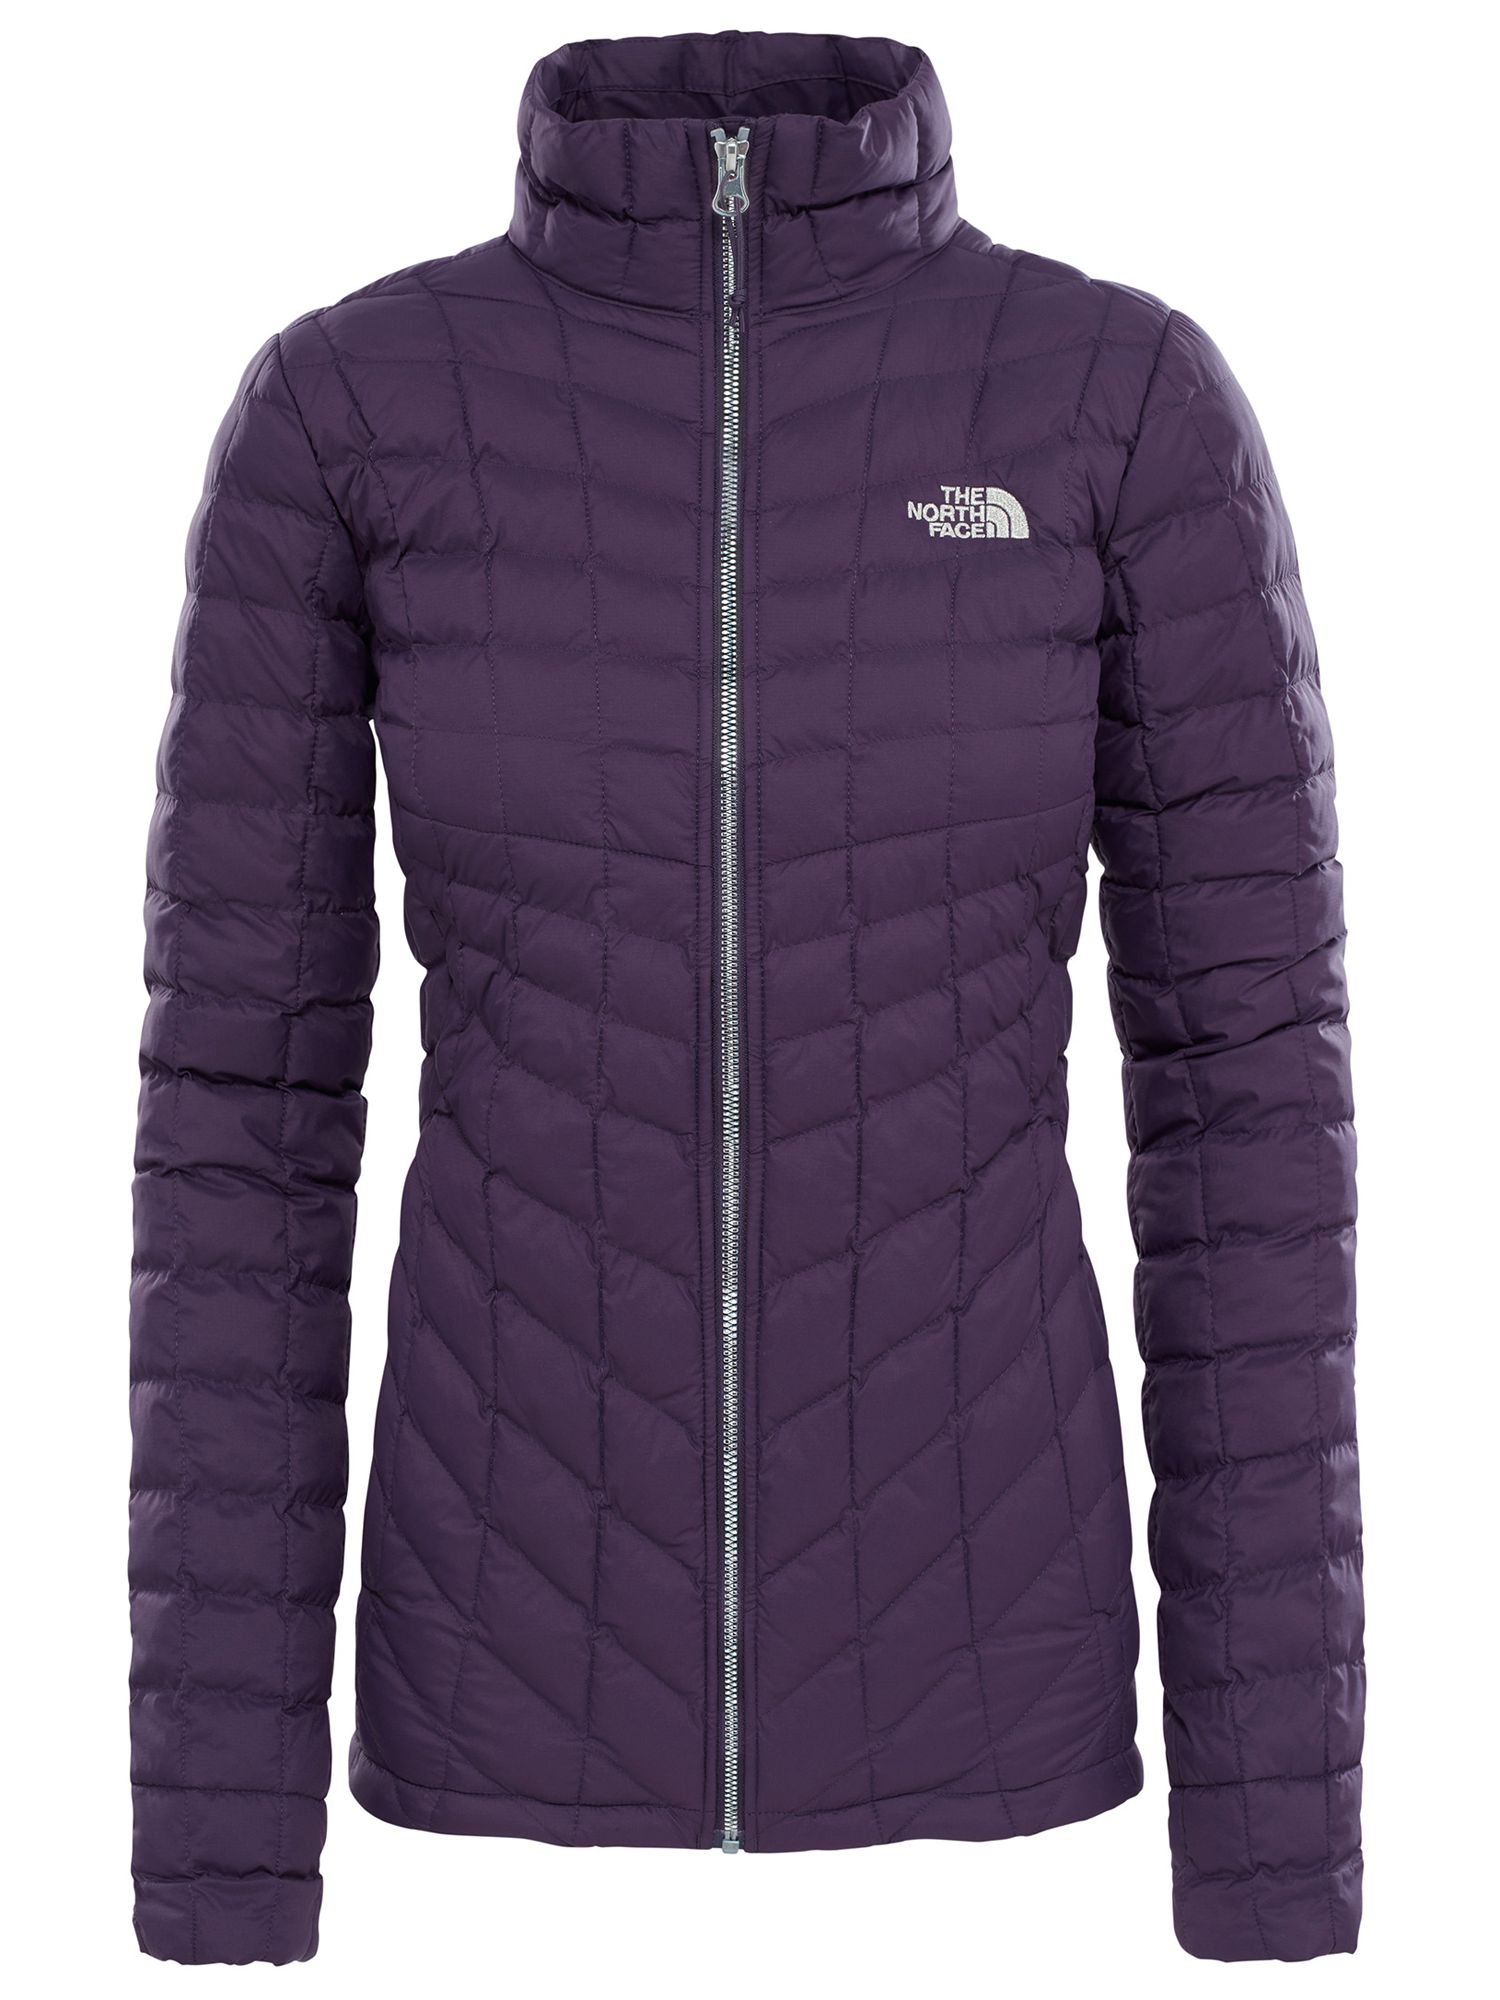 The North Face Thermoball Zip-In Women's Insulated Jacket, Purple, L